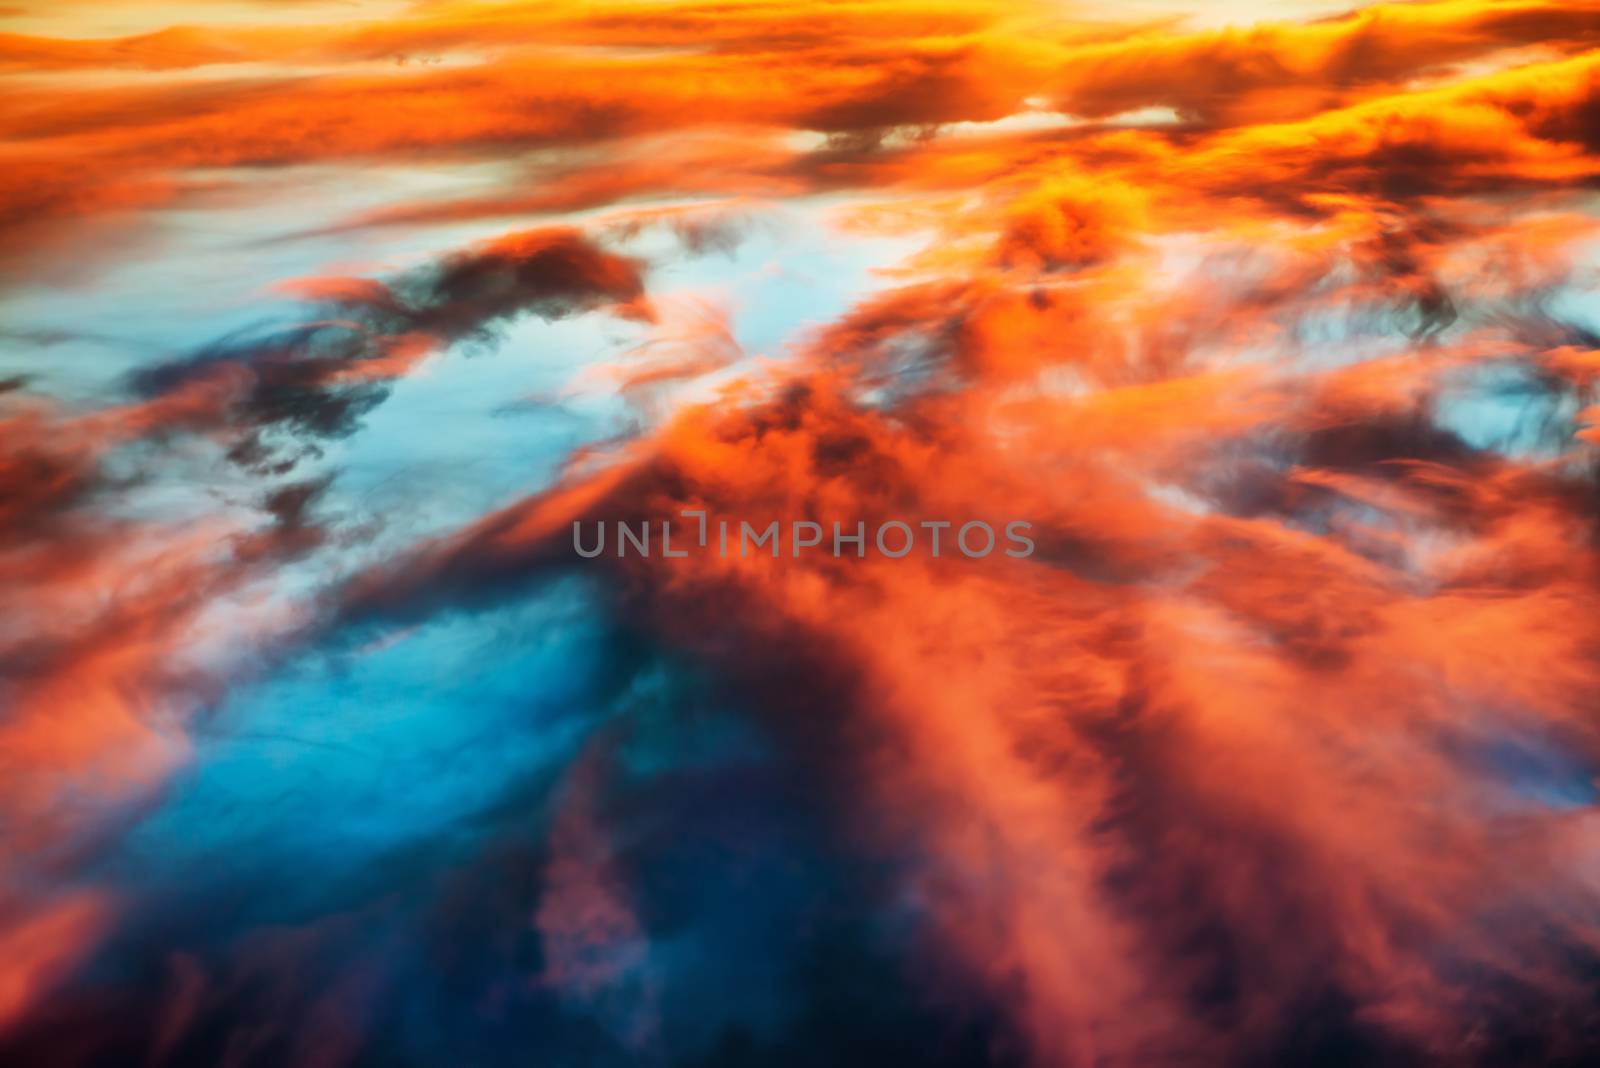 Aerial view to colorful orange and blue dramatic sky with clouds for abstract background